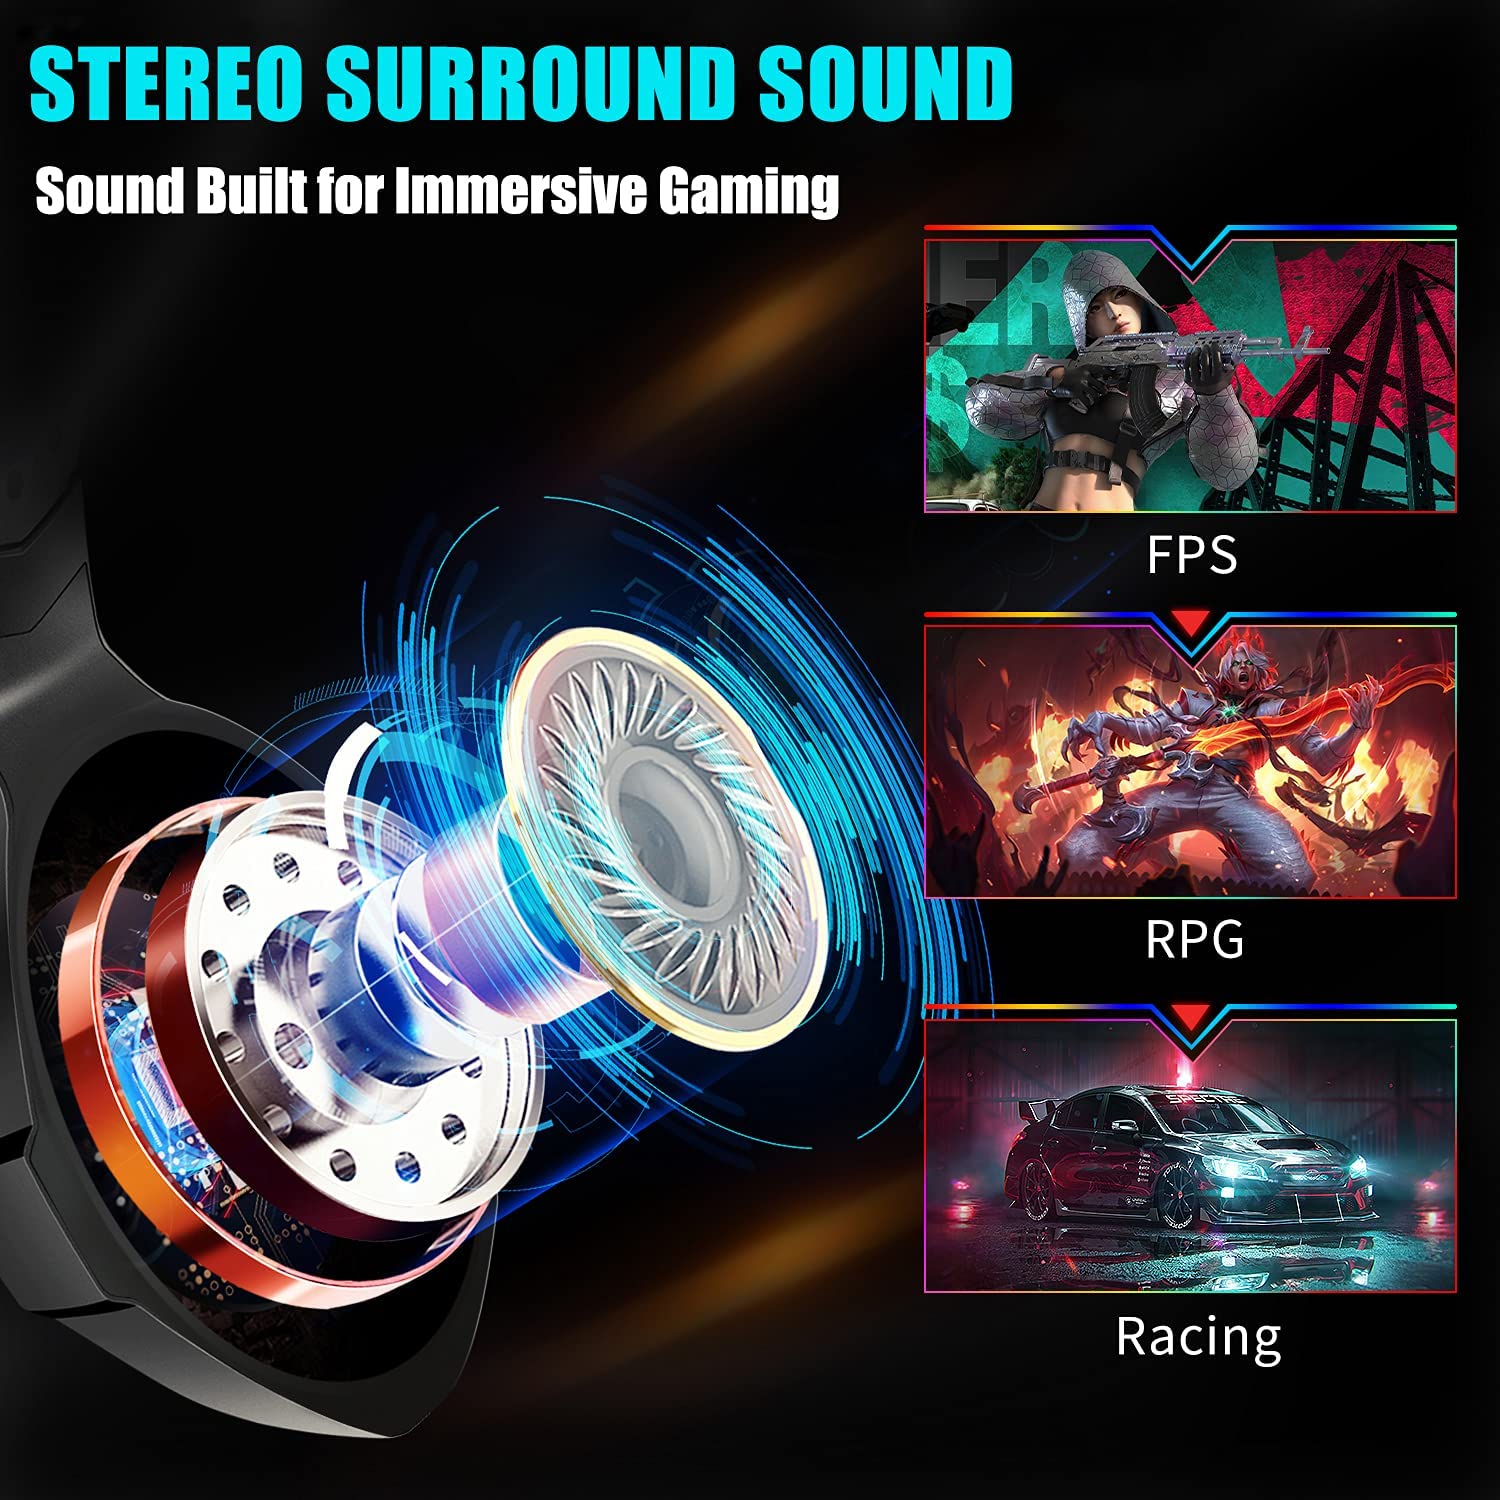 Gaming Headset Stereo Surround Sound Gaming Headphones with Breathing RGB Light & Adjustable Mic for PS4 PS5 PC Xbox One Laptop Mac